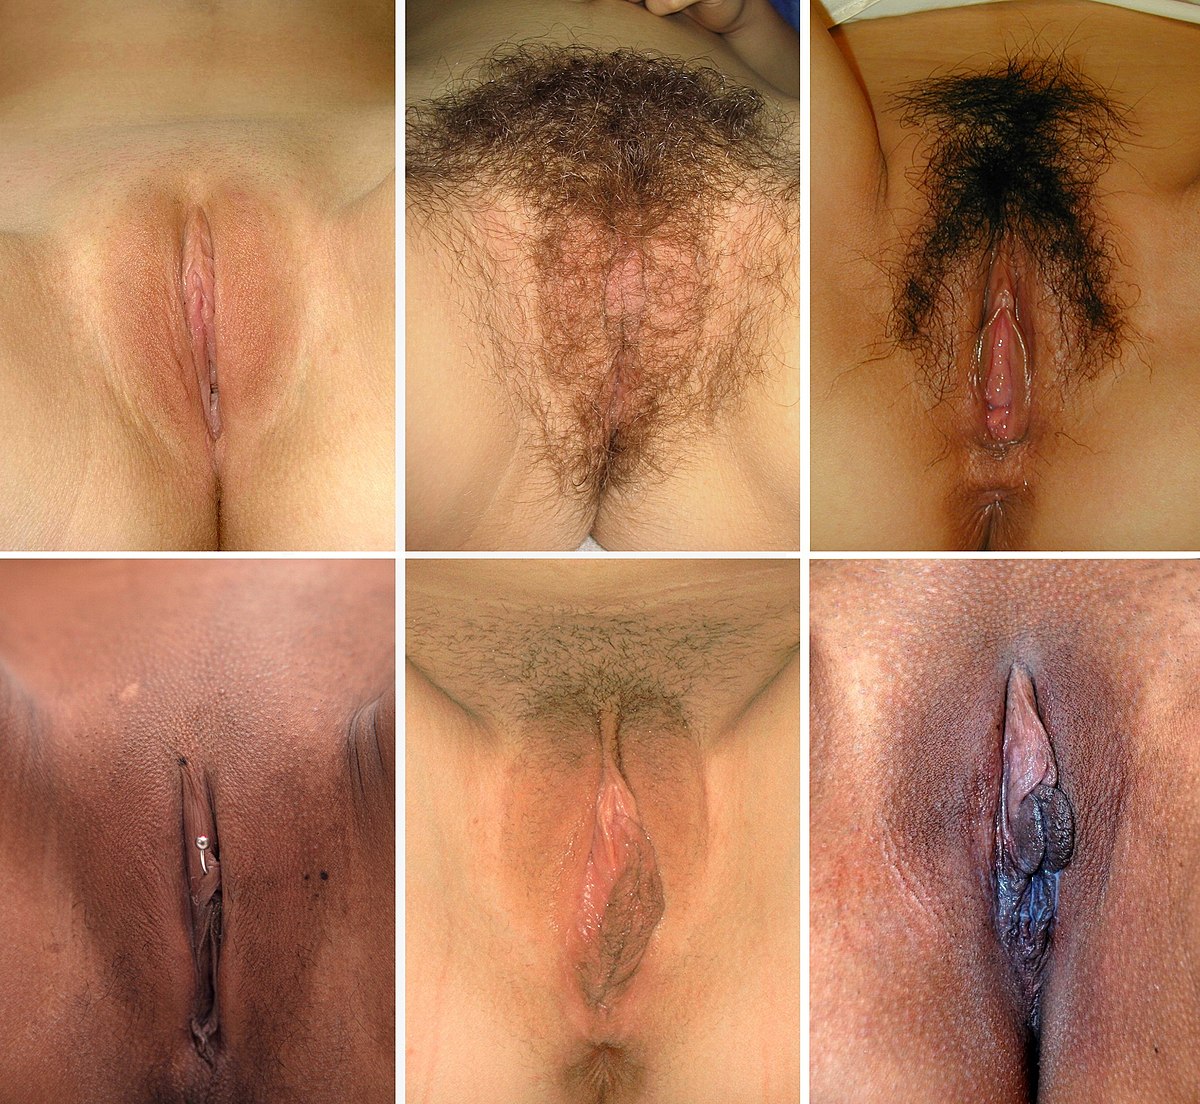 carl stedman recommends vagina real pictures pic